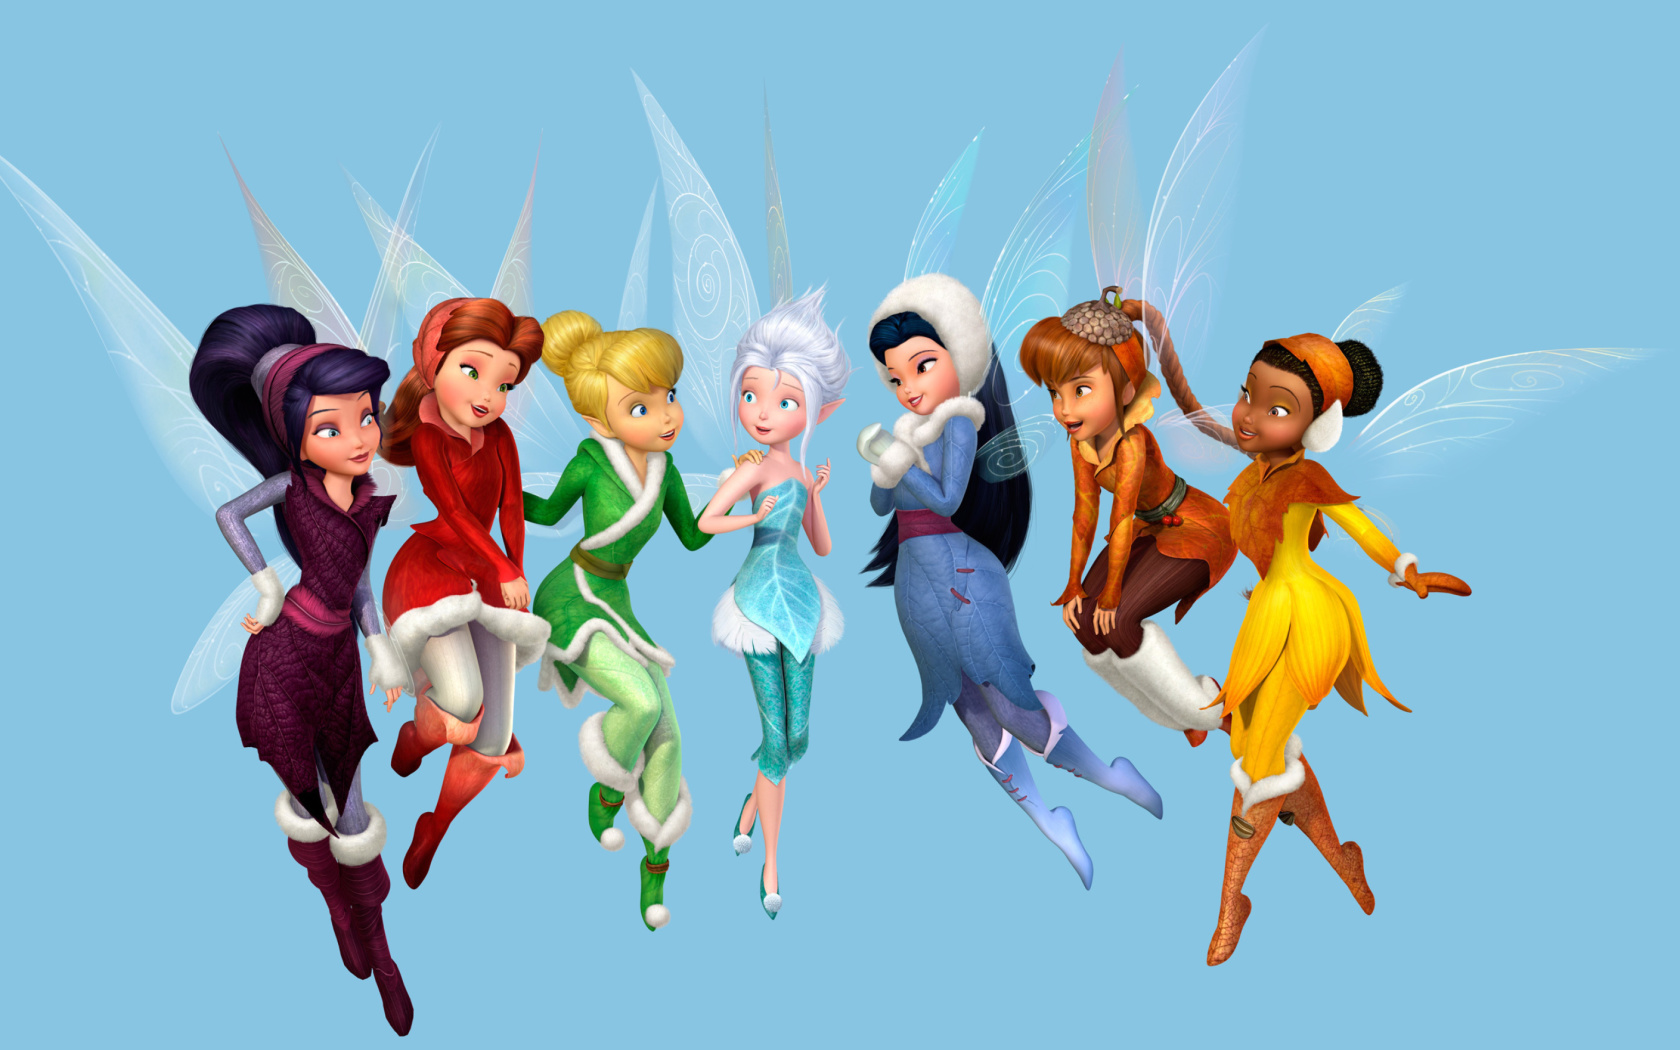 Das Tinkerbell and the Mysterious Winter Woods Wallpaper 1680x1050